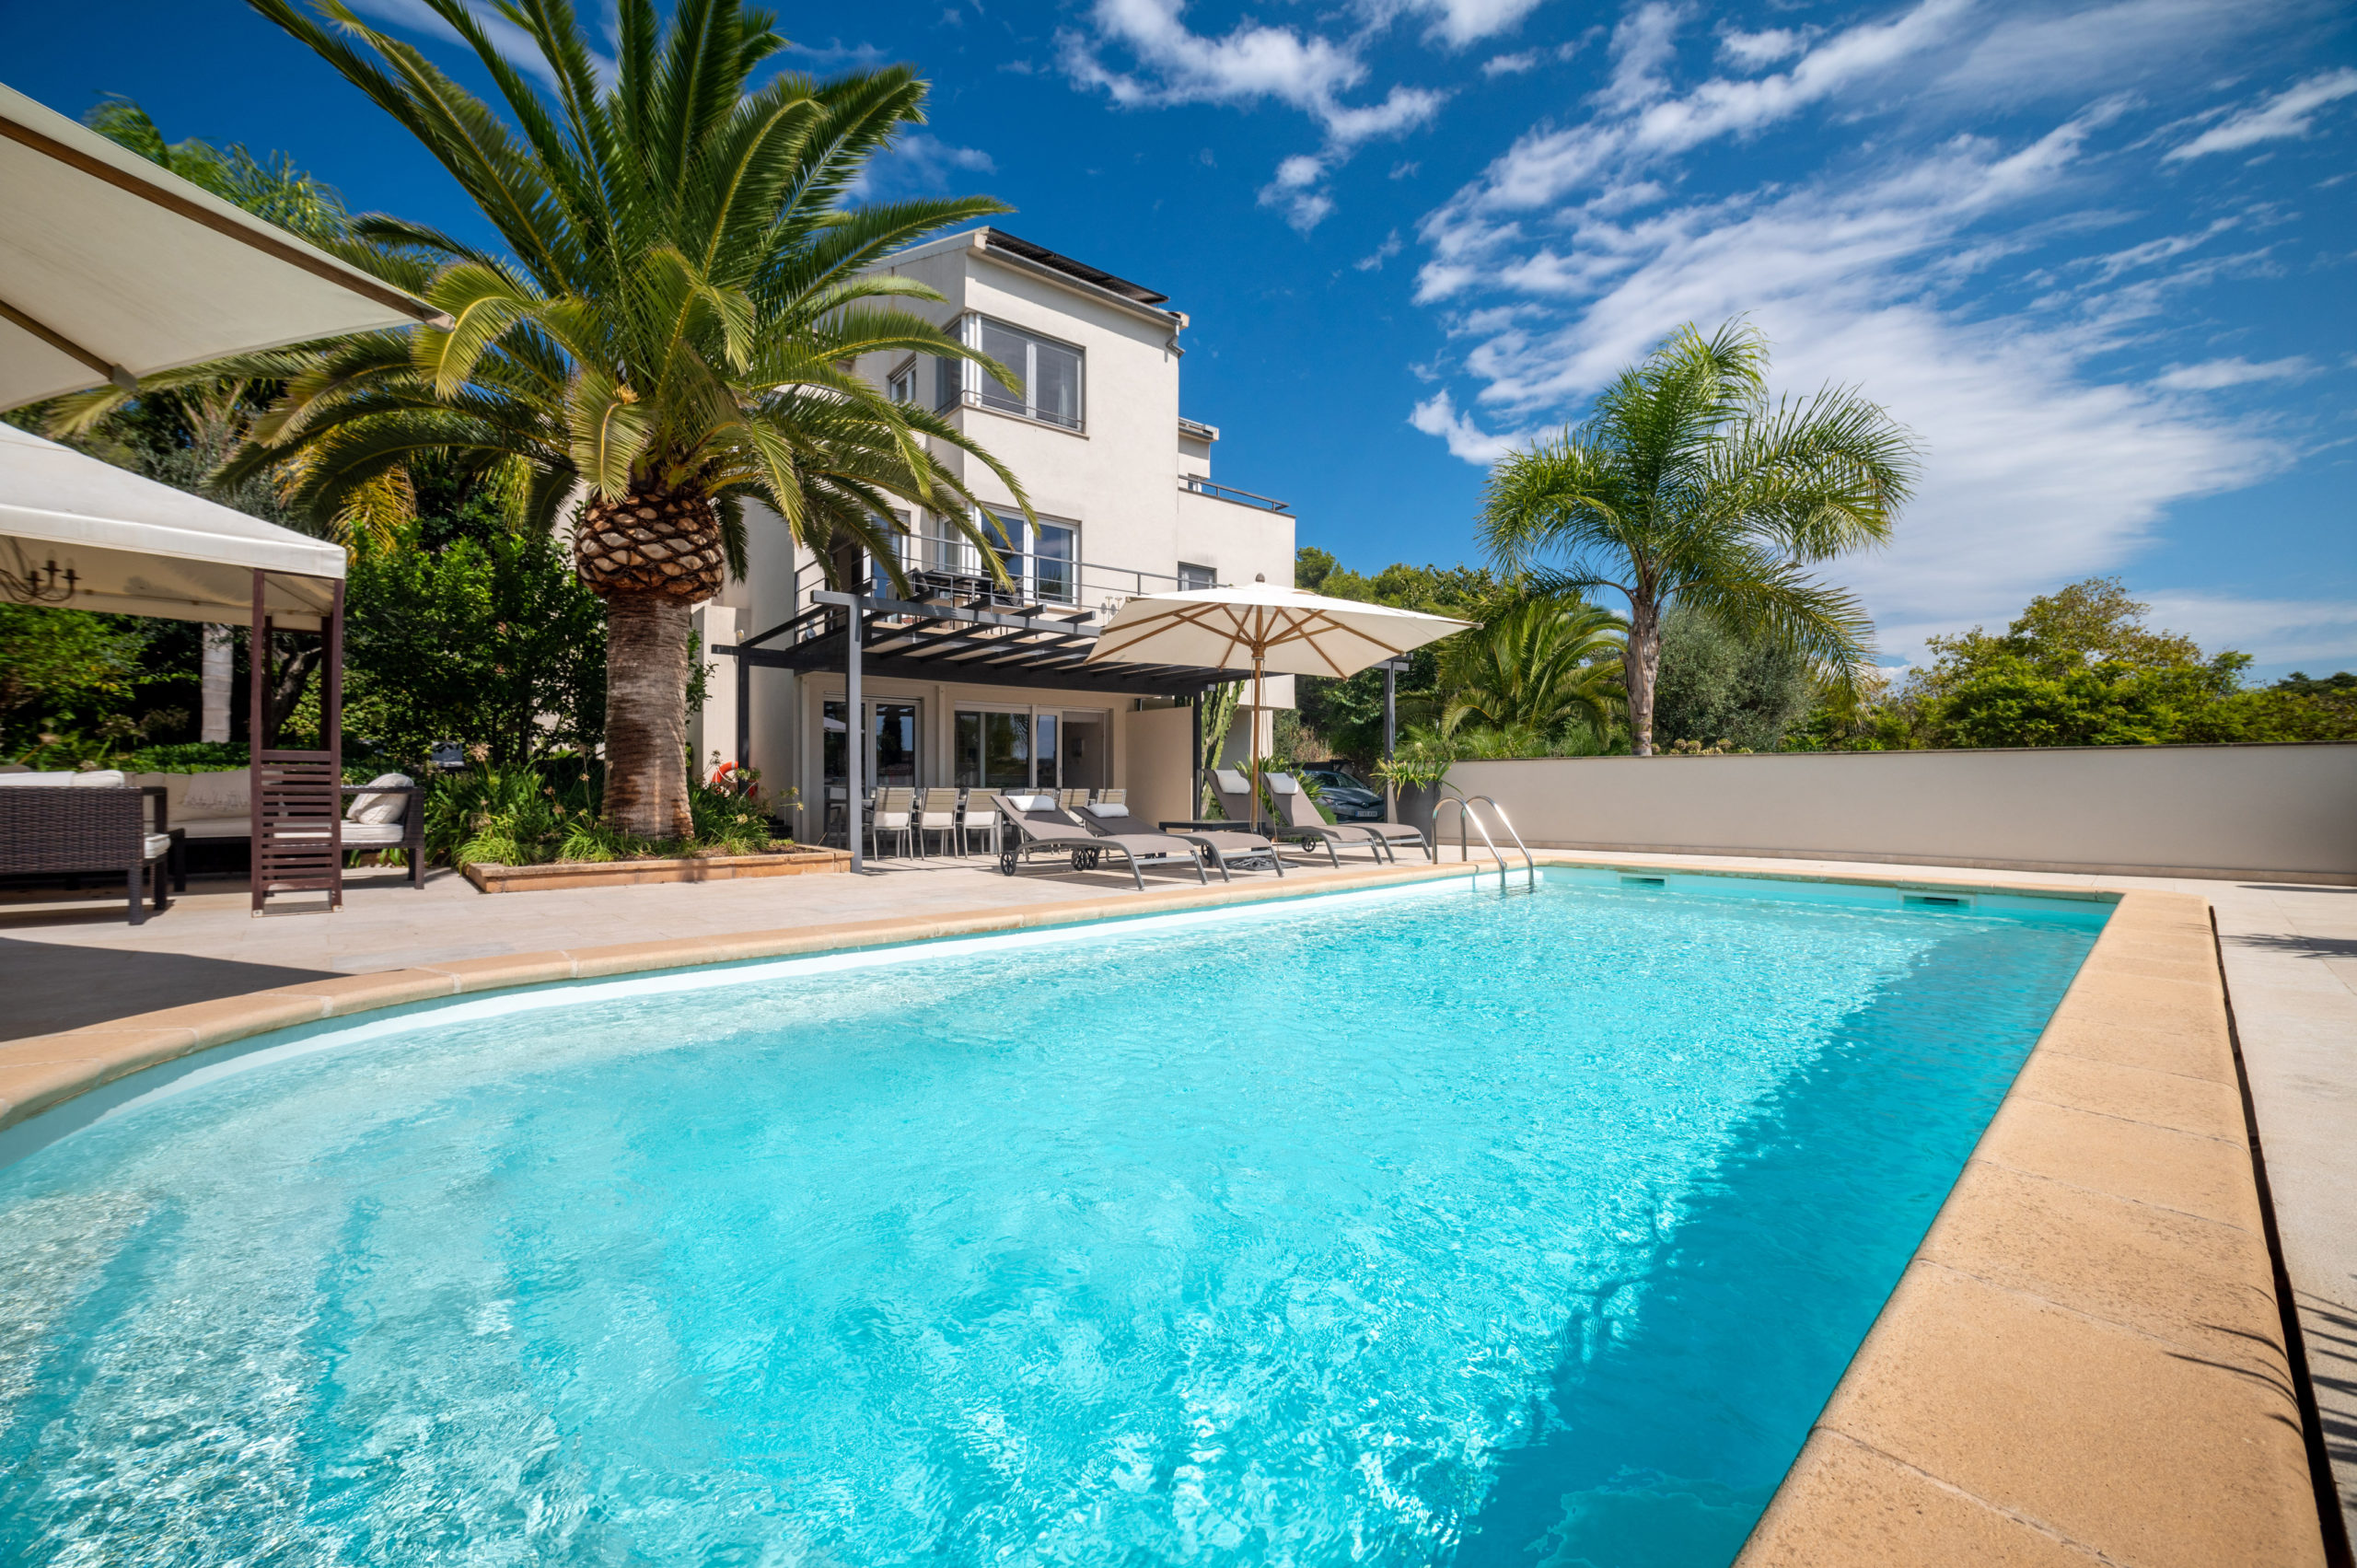 Modern, elegant villa with 2 separate guest apartments, with touristic rental licence, near to Son Vida